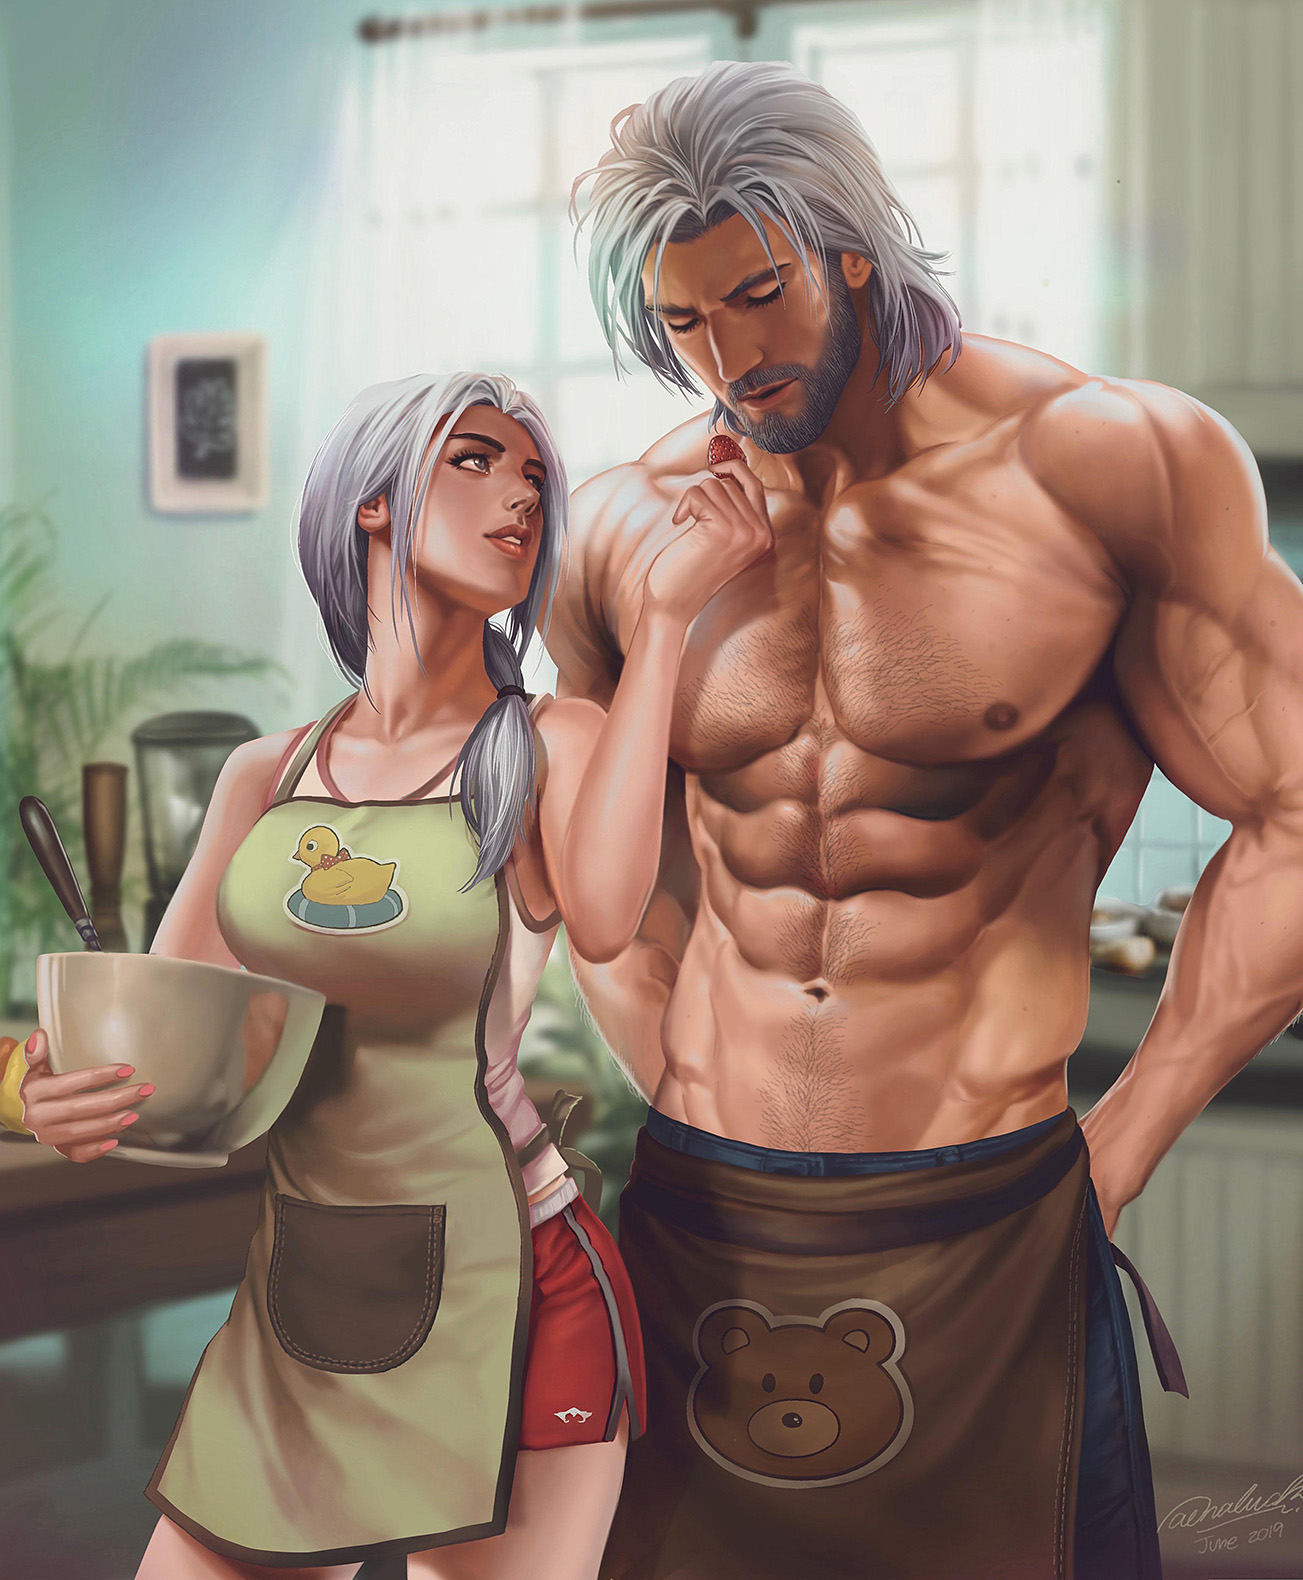 Hot couple in the kitchen by aenaluck on DeviantArt